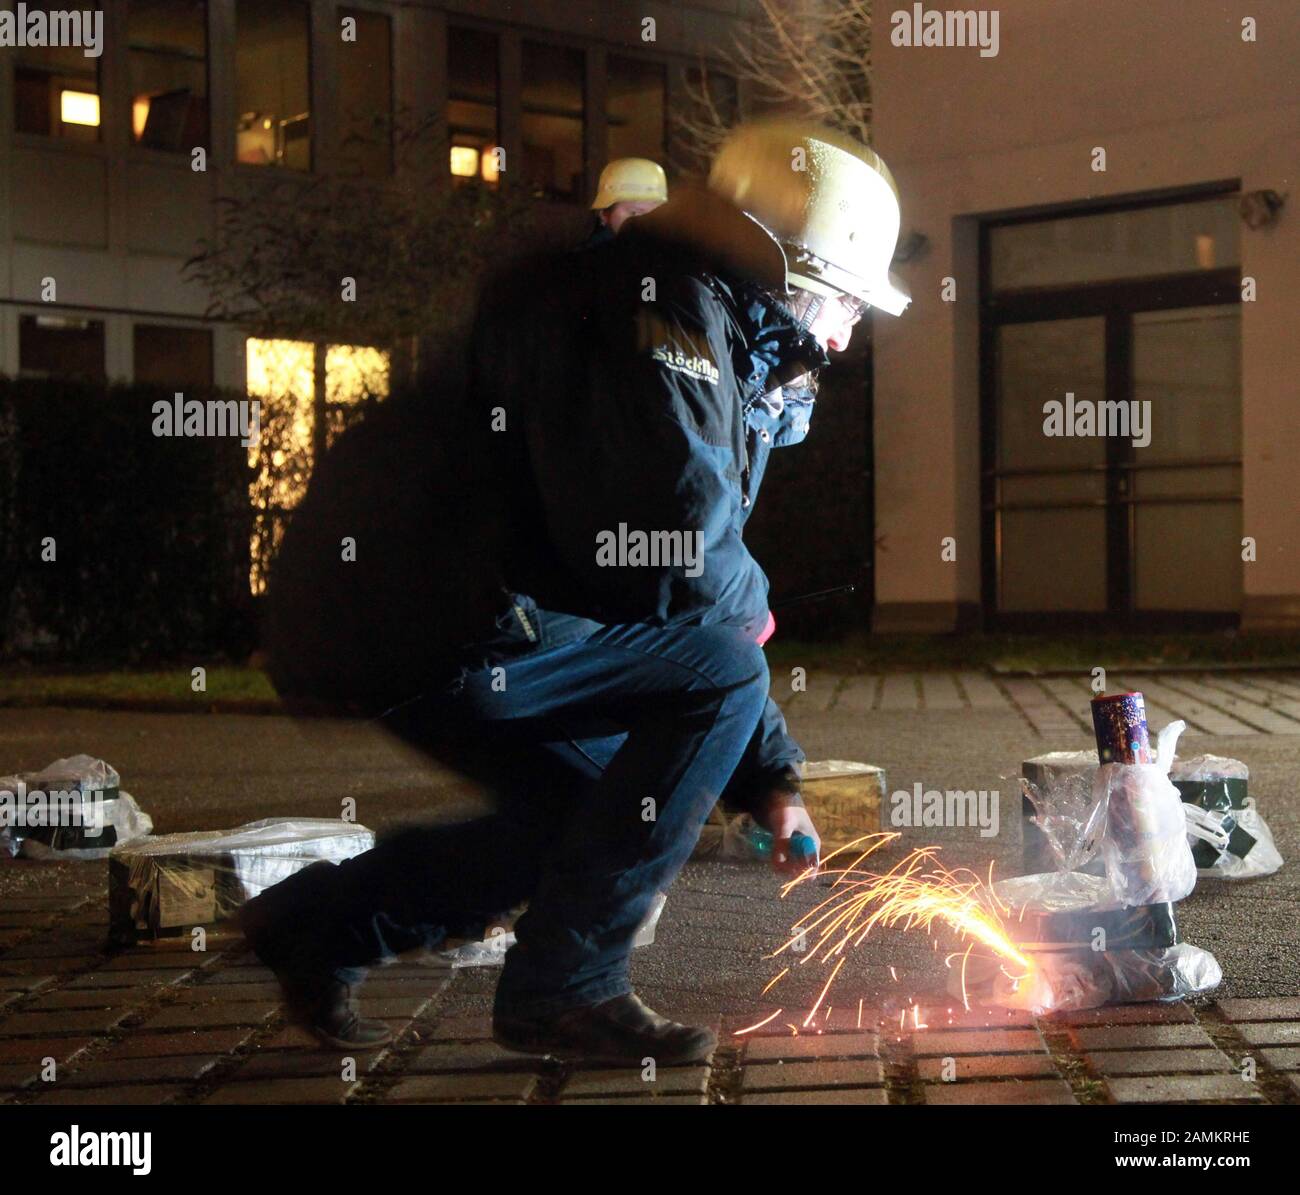 The pyrotechnician couple Norbert and Erika Stöcklin from Munich organize a test fireworks display on a Munich parking lot before New Year's Eve. [automated translation] Stock Photo